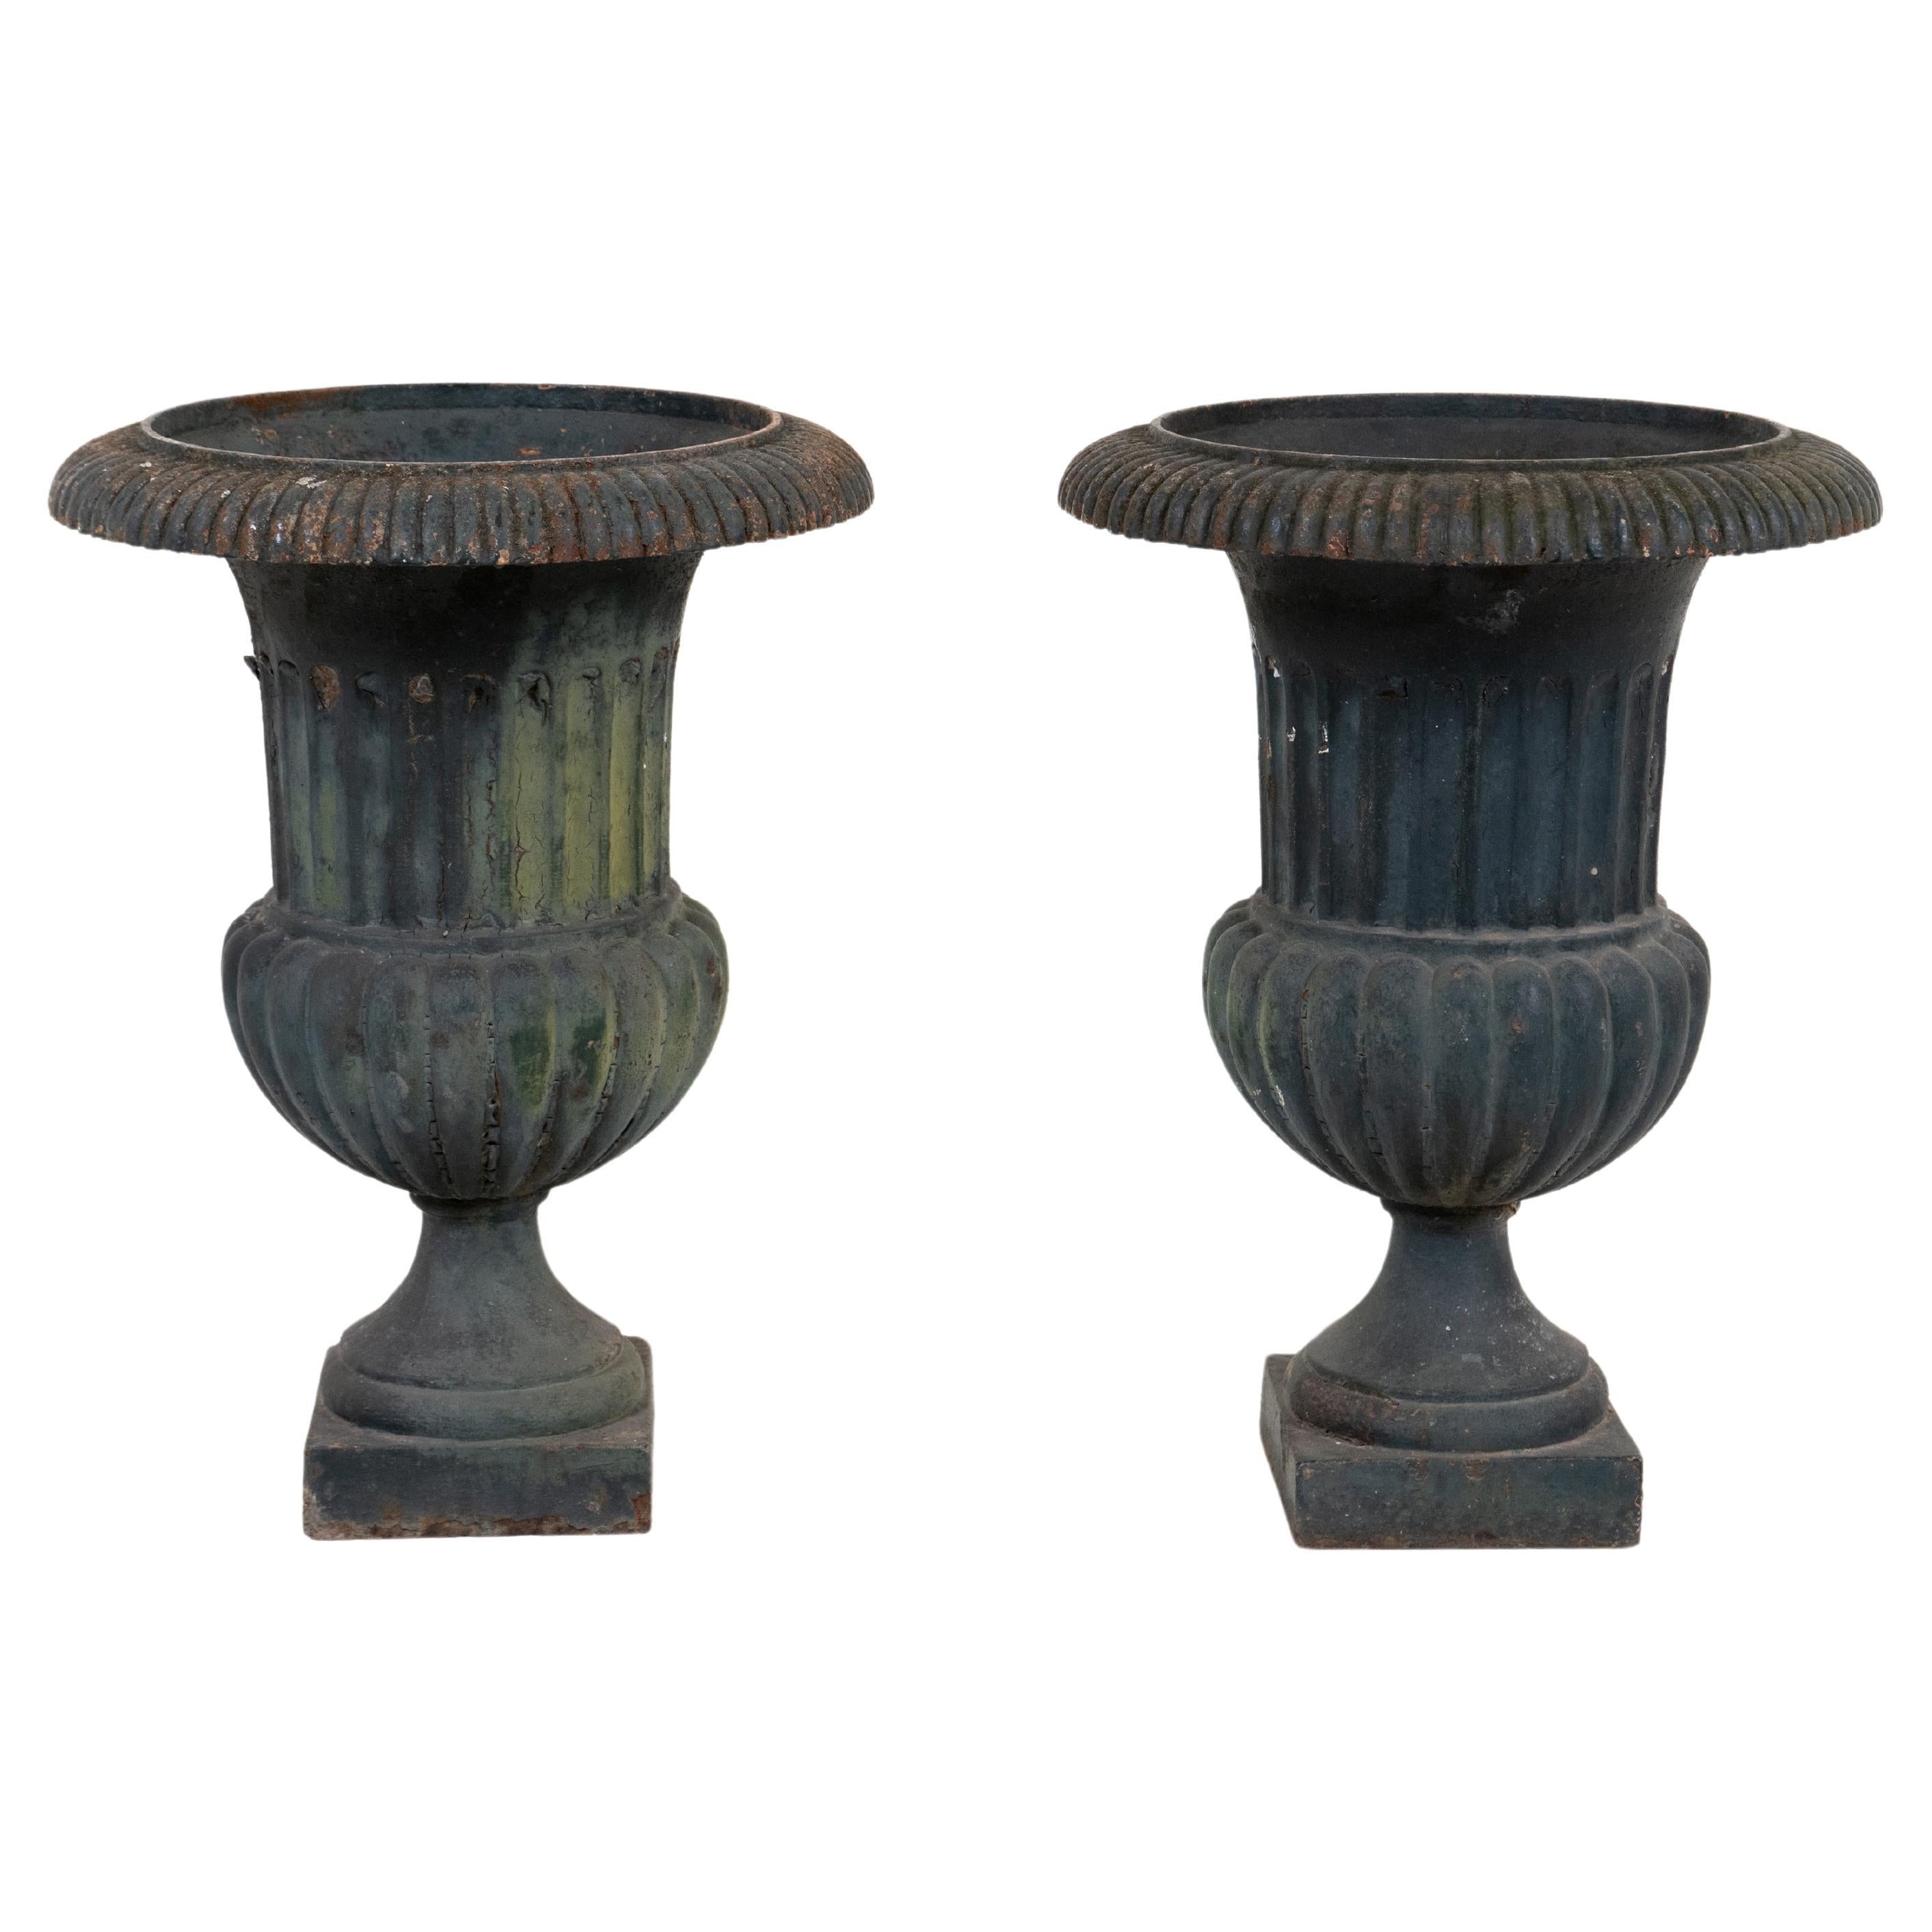 A Pair of Antique French Neoclassical Iron Garden Urns in Black For Sale